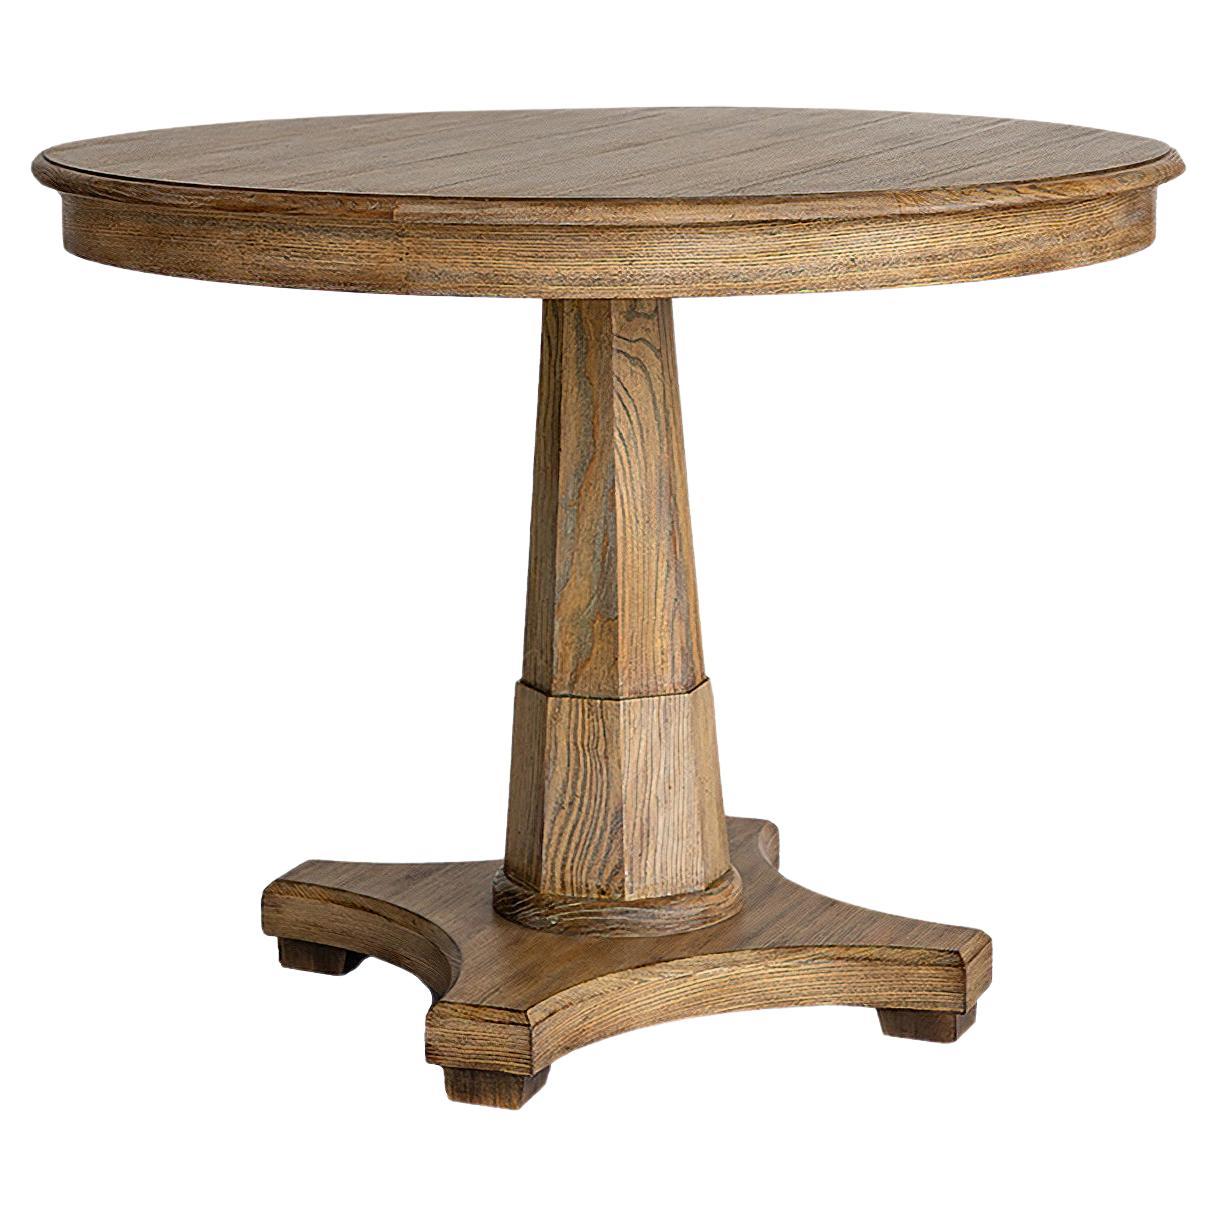 Classic Empire Center Table, Oatmeal